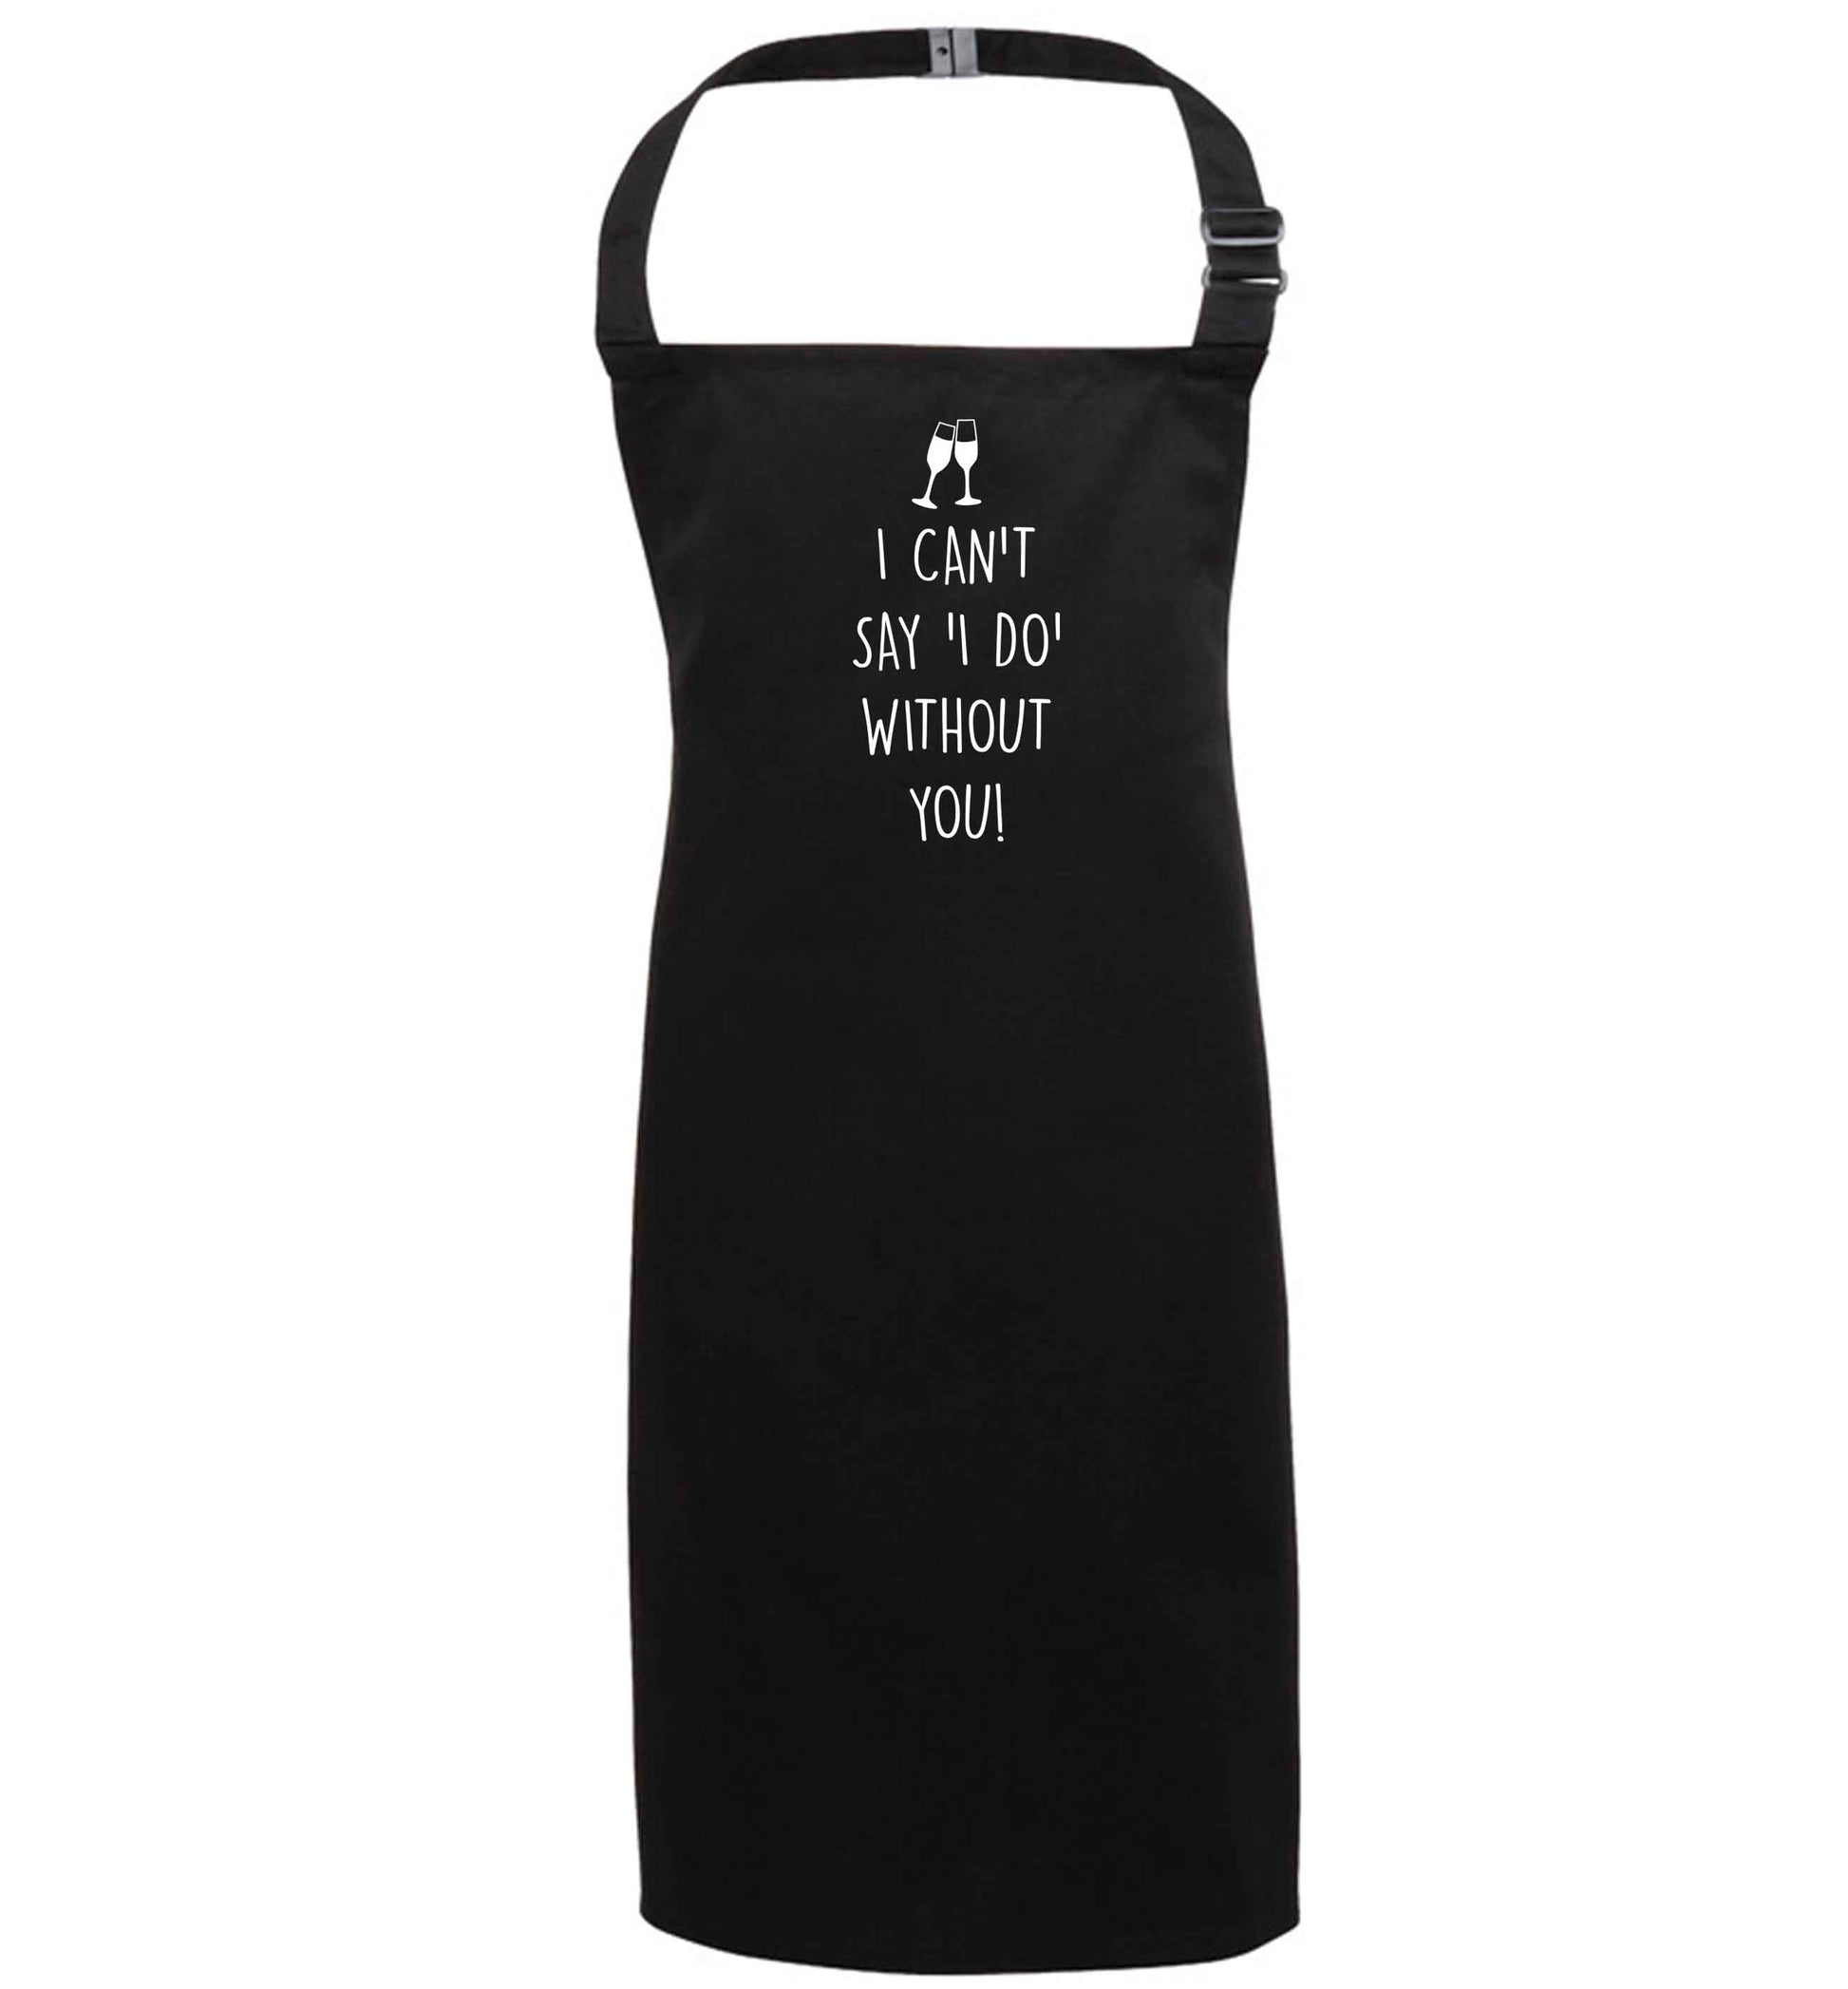 I can't say 'I do' without you! black apron 7-10 years